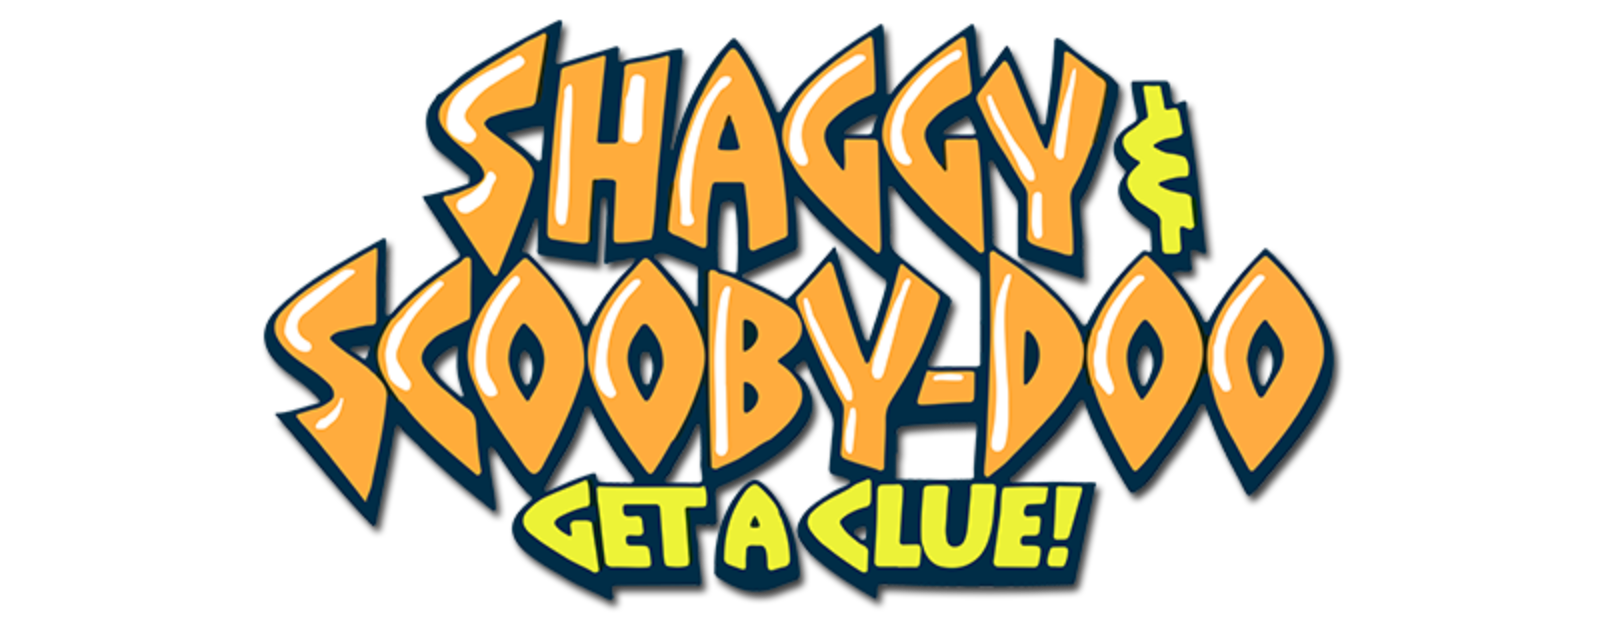 Shaggy Scooby Doo Get a Clue Complete (3 DVDs Box Set)